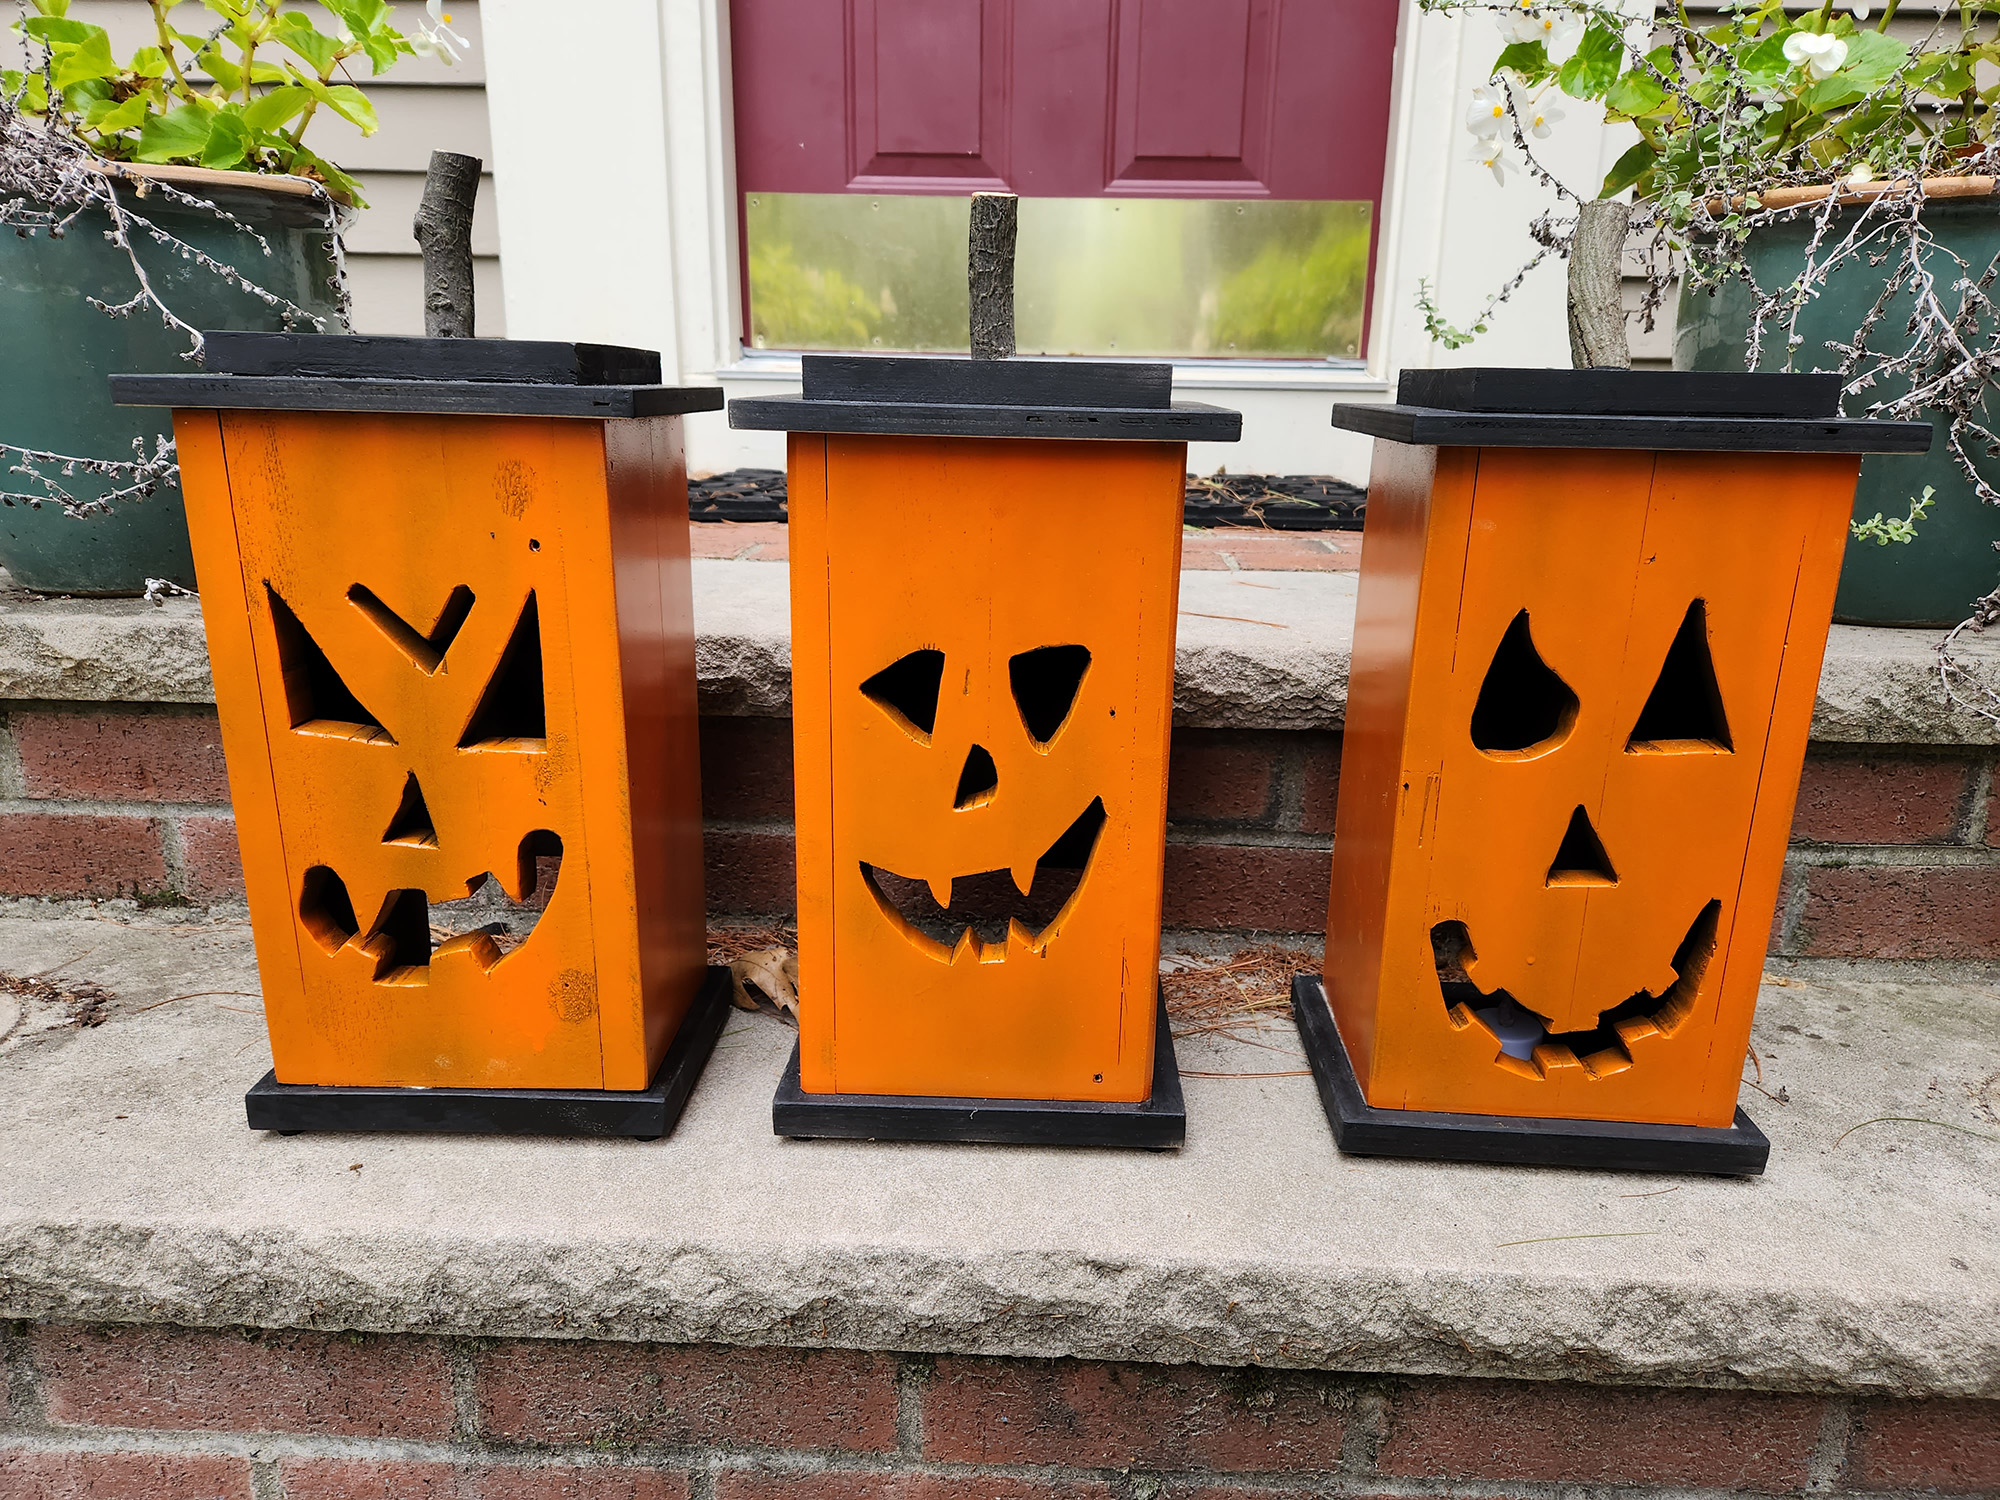 Make wooden Jack-o’-lanterns you can reuse for many happy Halloweens